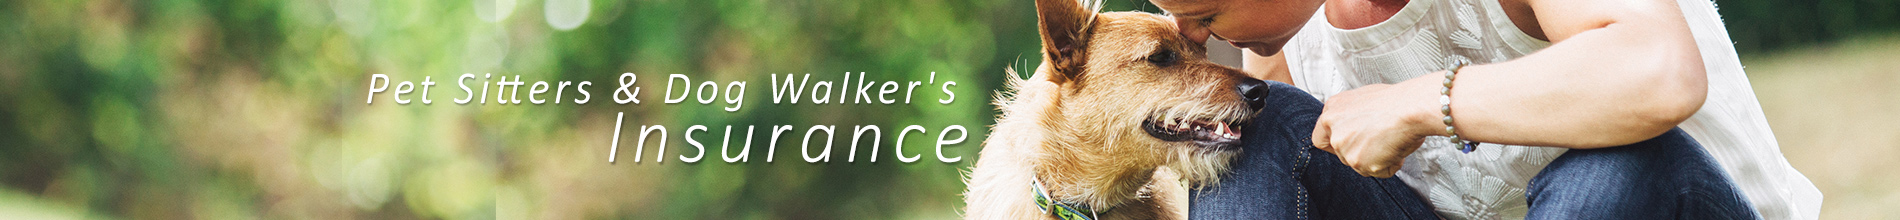 Pet Sitters and Dog Walkers Business Insurance